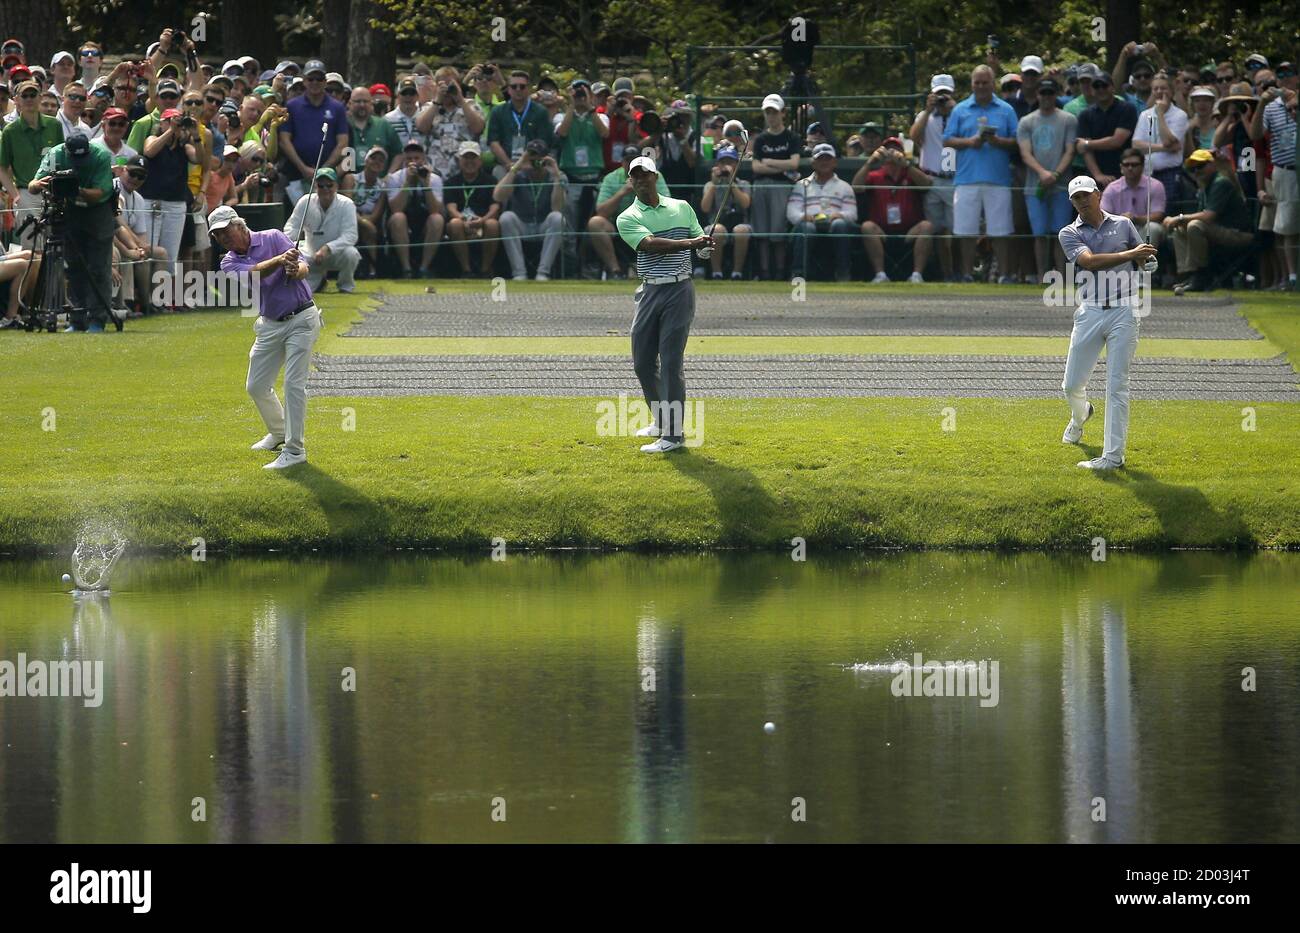 Jordan Spieth (R) skips a ball aross water to the 16th green with Tiger Woods (C) and Ben Crenshaw during their practice round ahead of the 2015 Masters at Augusta National Golf Course in Augusta, Georgia April 8, 2015. Spieth's sublime putting on some of the most treacherous greens in golf, which set up his Masters victory on Sunday, was underpinned by his imaginative touch, says putting maestro Crenshaw. Picture taken April 8, 2015.  REUTERS/Brian Snyder Stock Photo